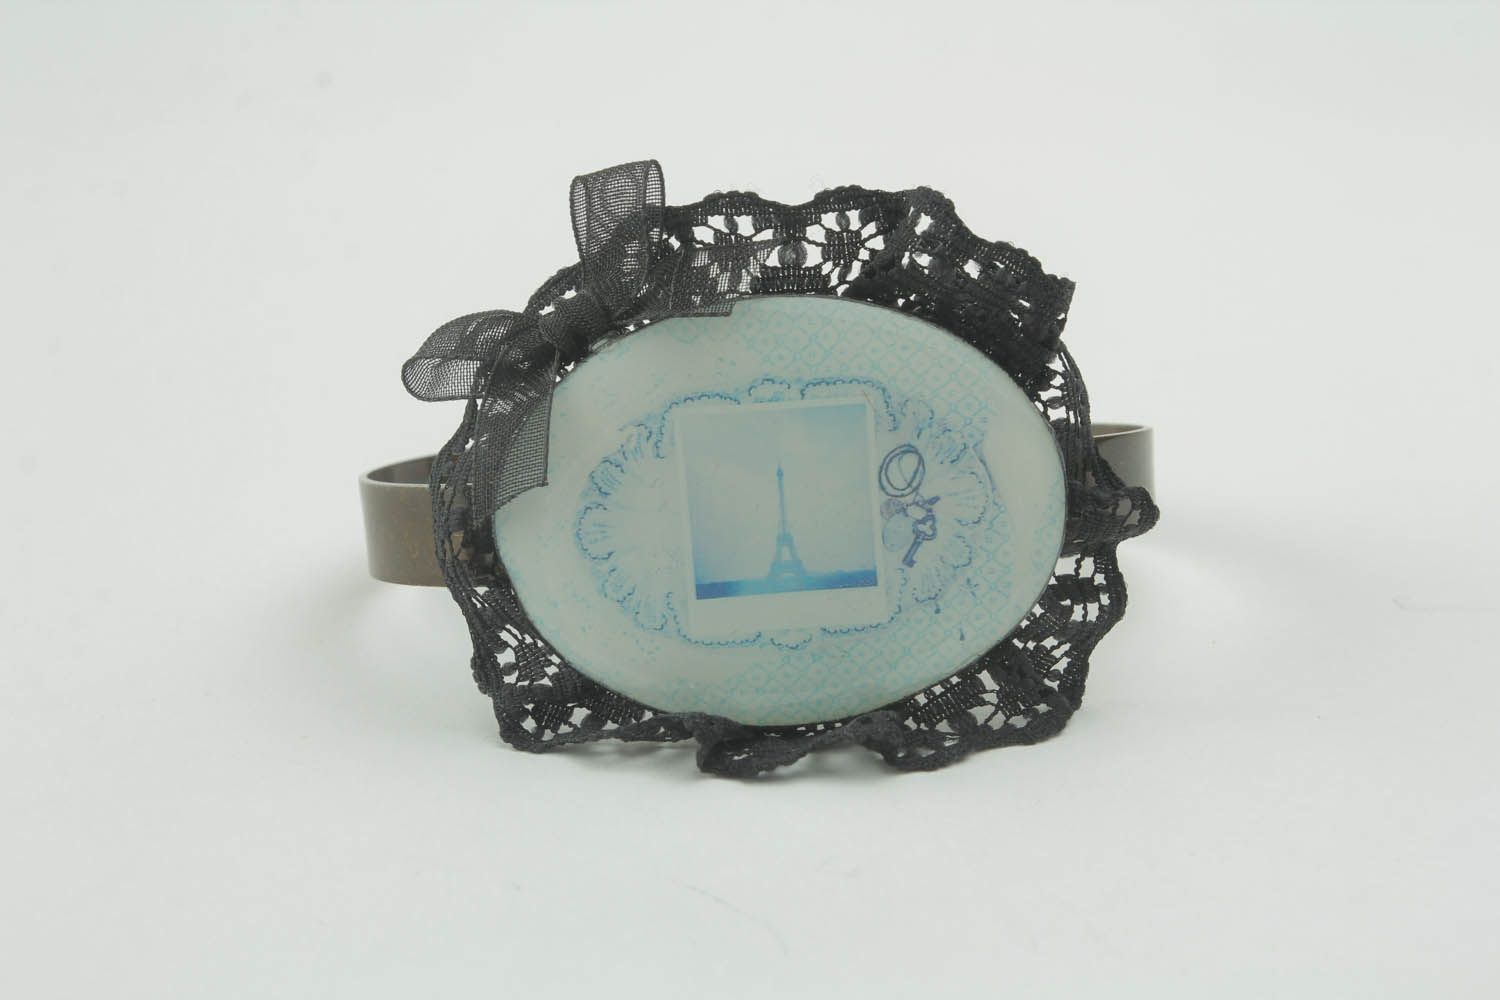 Bracelet made of satin and lace photo 1